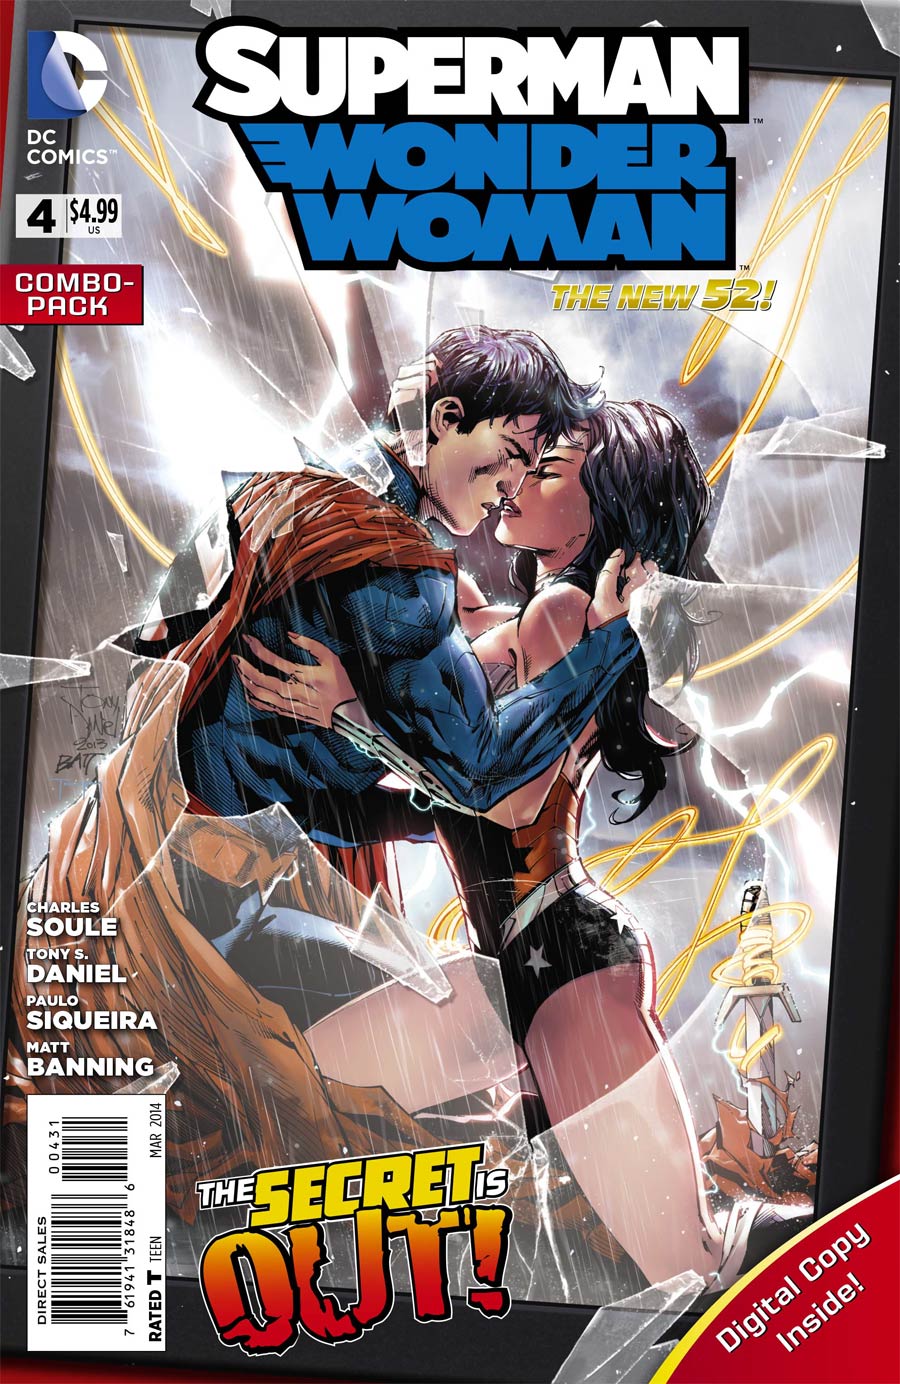 Superman Wonder Woman #4 Cover B Combo Pack With Polybag